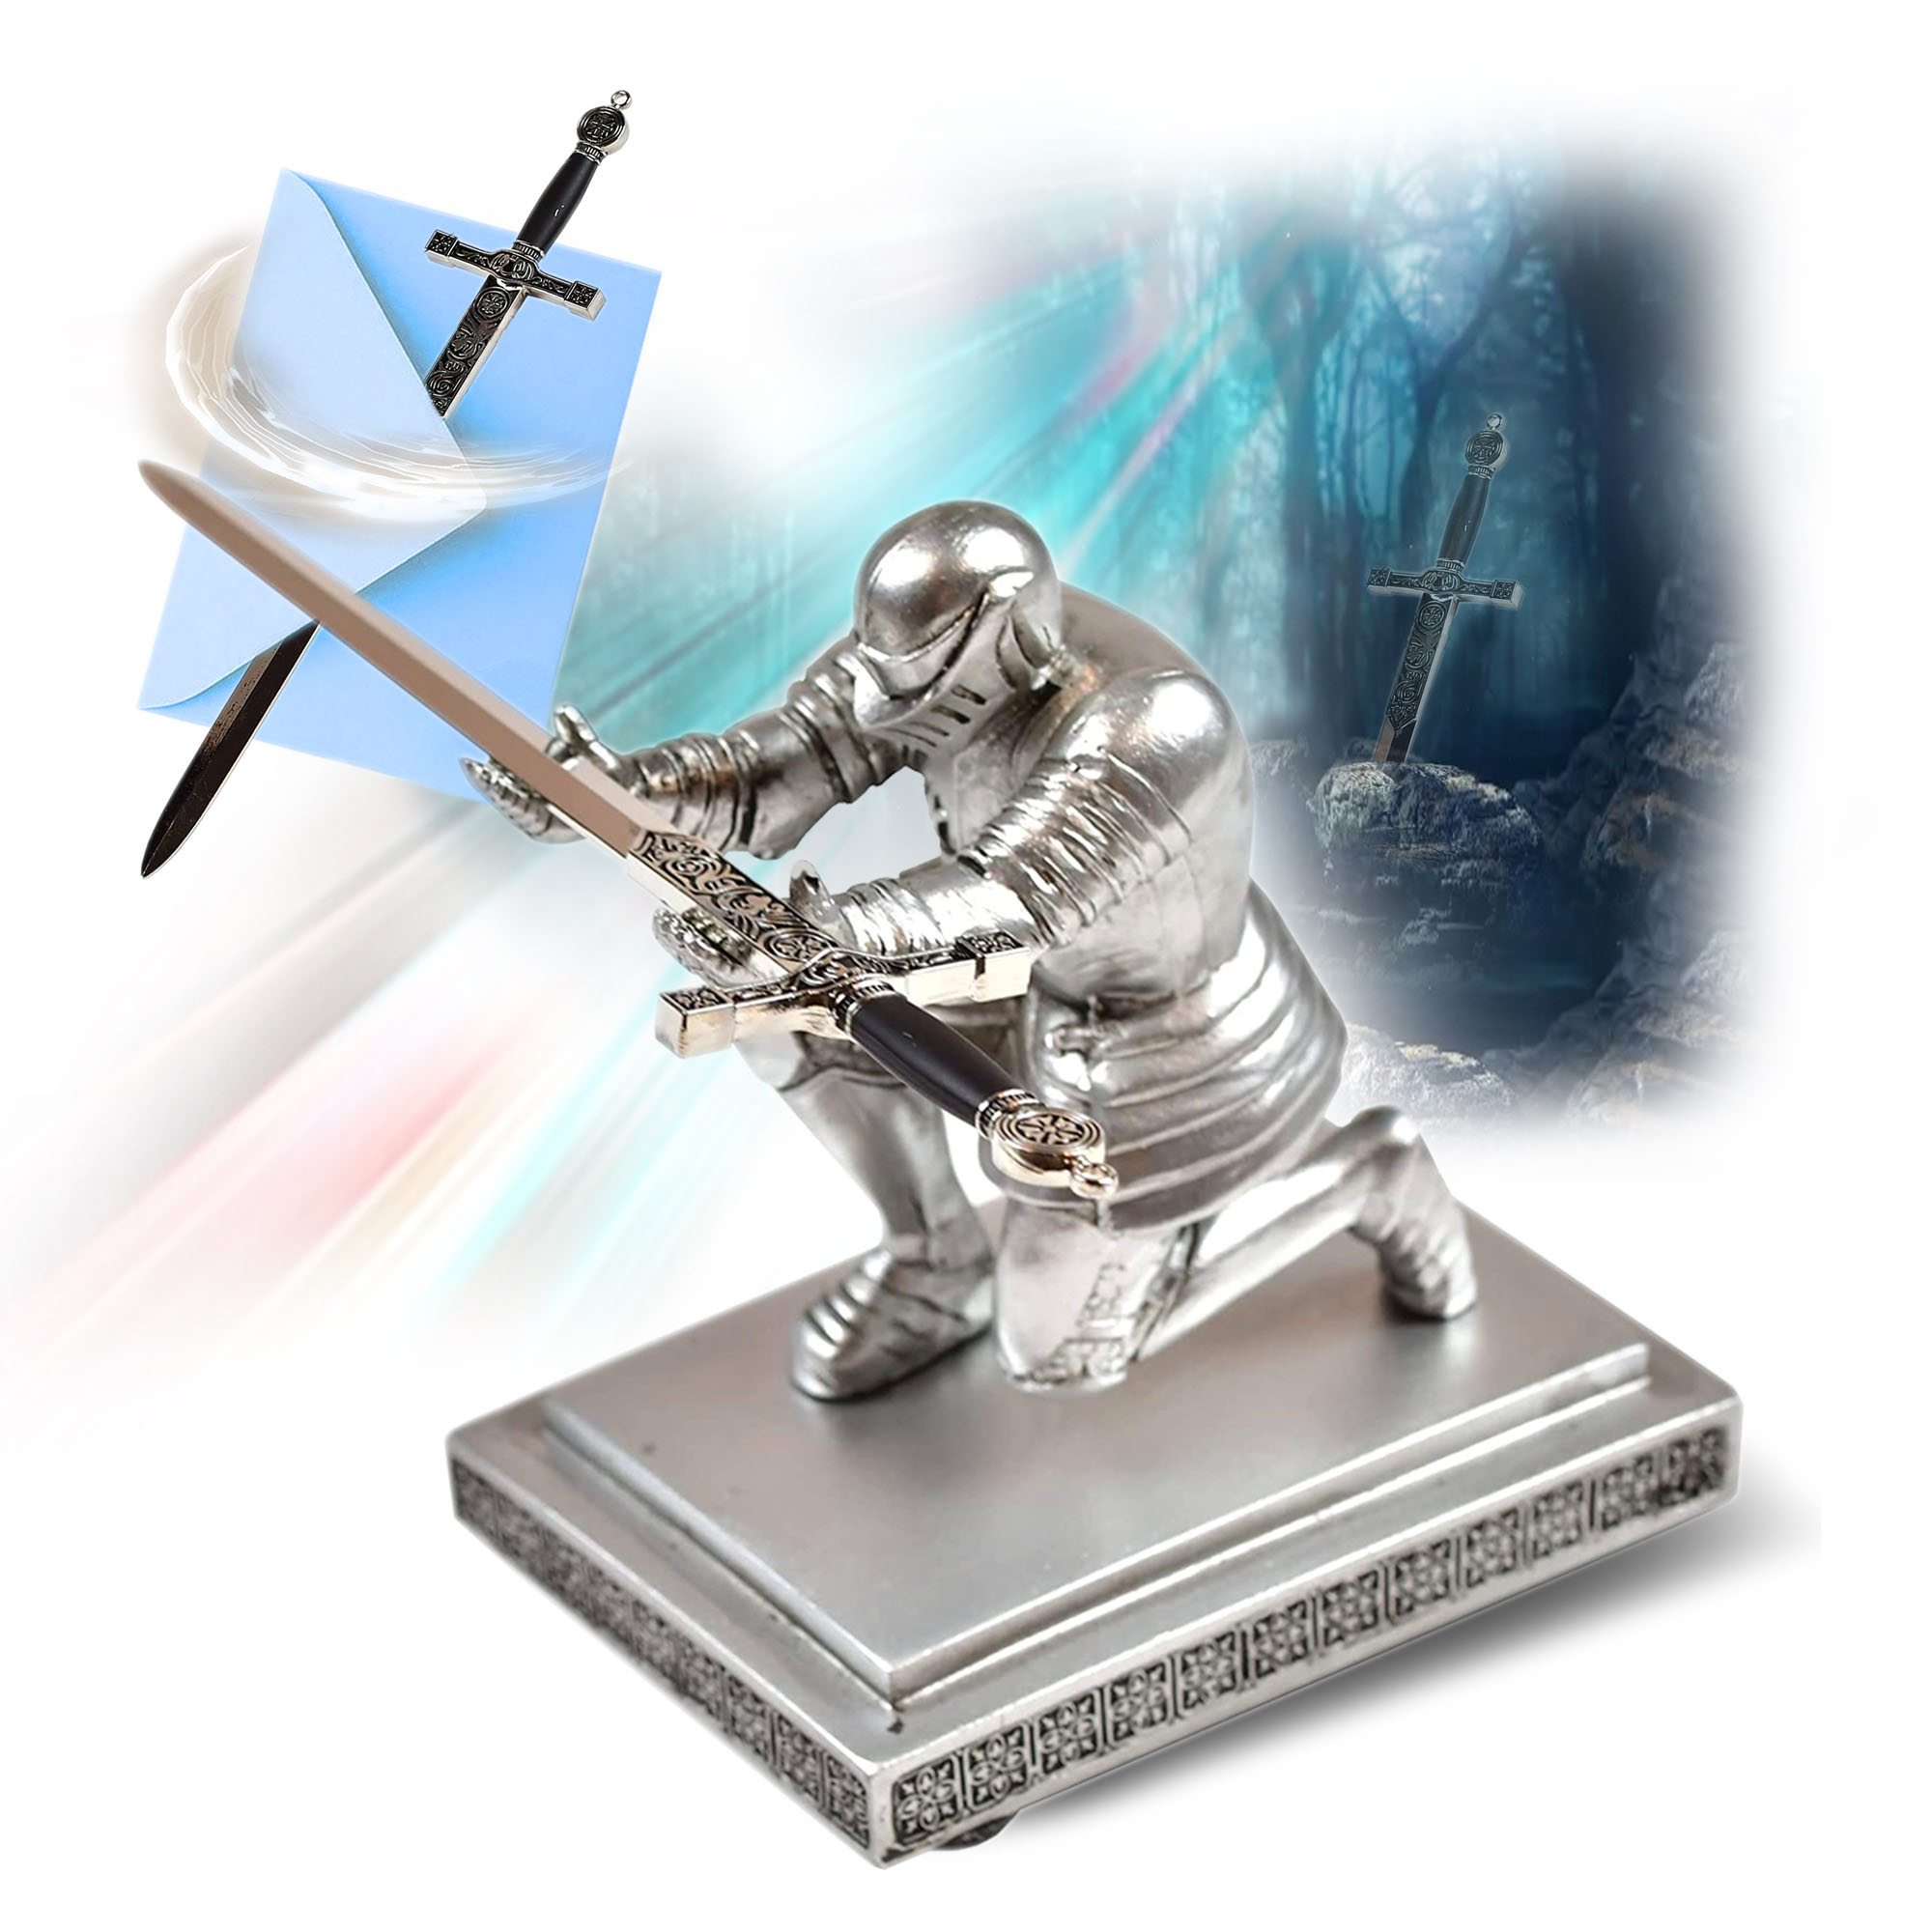 King Arthur's Excalibur sword as a letter opener with a knight's stand